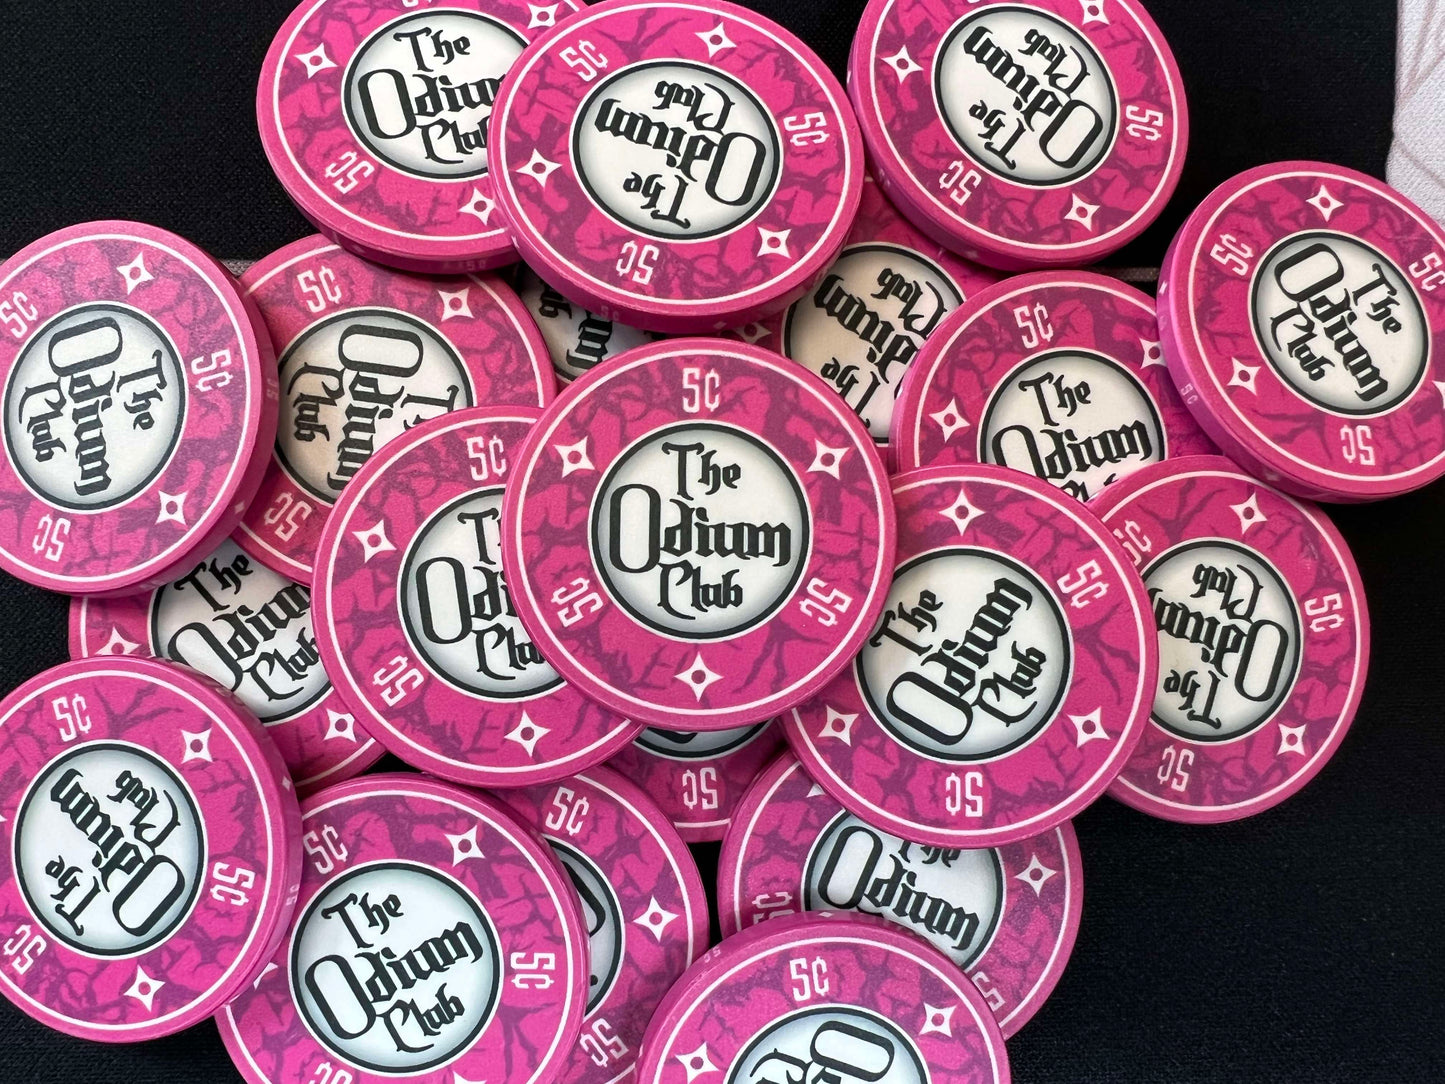 Shown here are the Odium Club 5 cent pink poker chips in a splashed pot. These are 39mm chips (actually closer to 40mm) traditional casino size poker chips. They are the standard poker chip thickness of 3.3mm or 0.13 inches. Whether you're just getting started in poker and need nickel chips for playing micro stakes...or whether you're a professional poker player, these chips will get your texas hold'em game started off right.